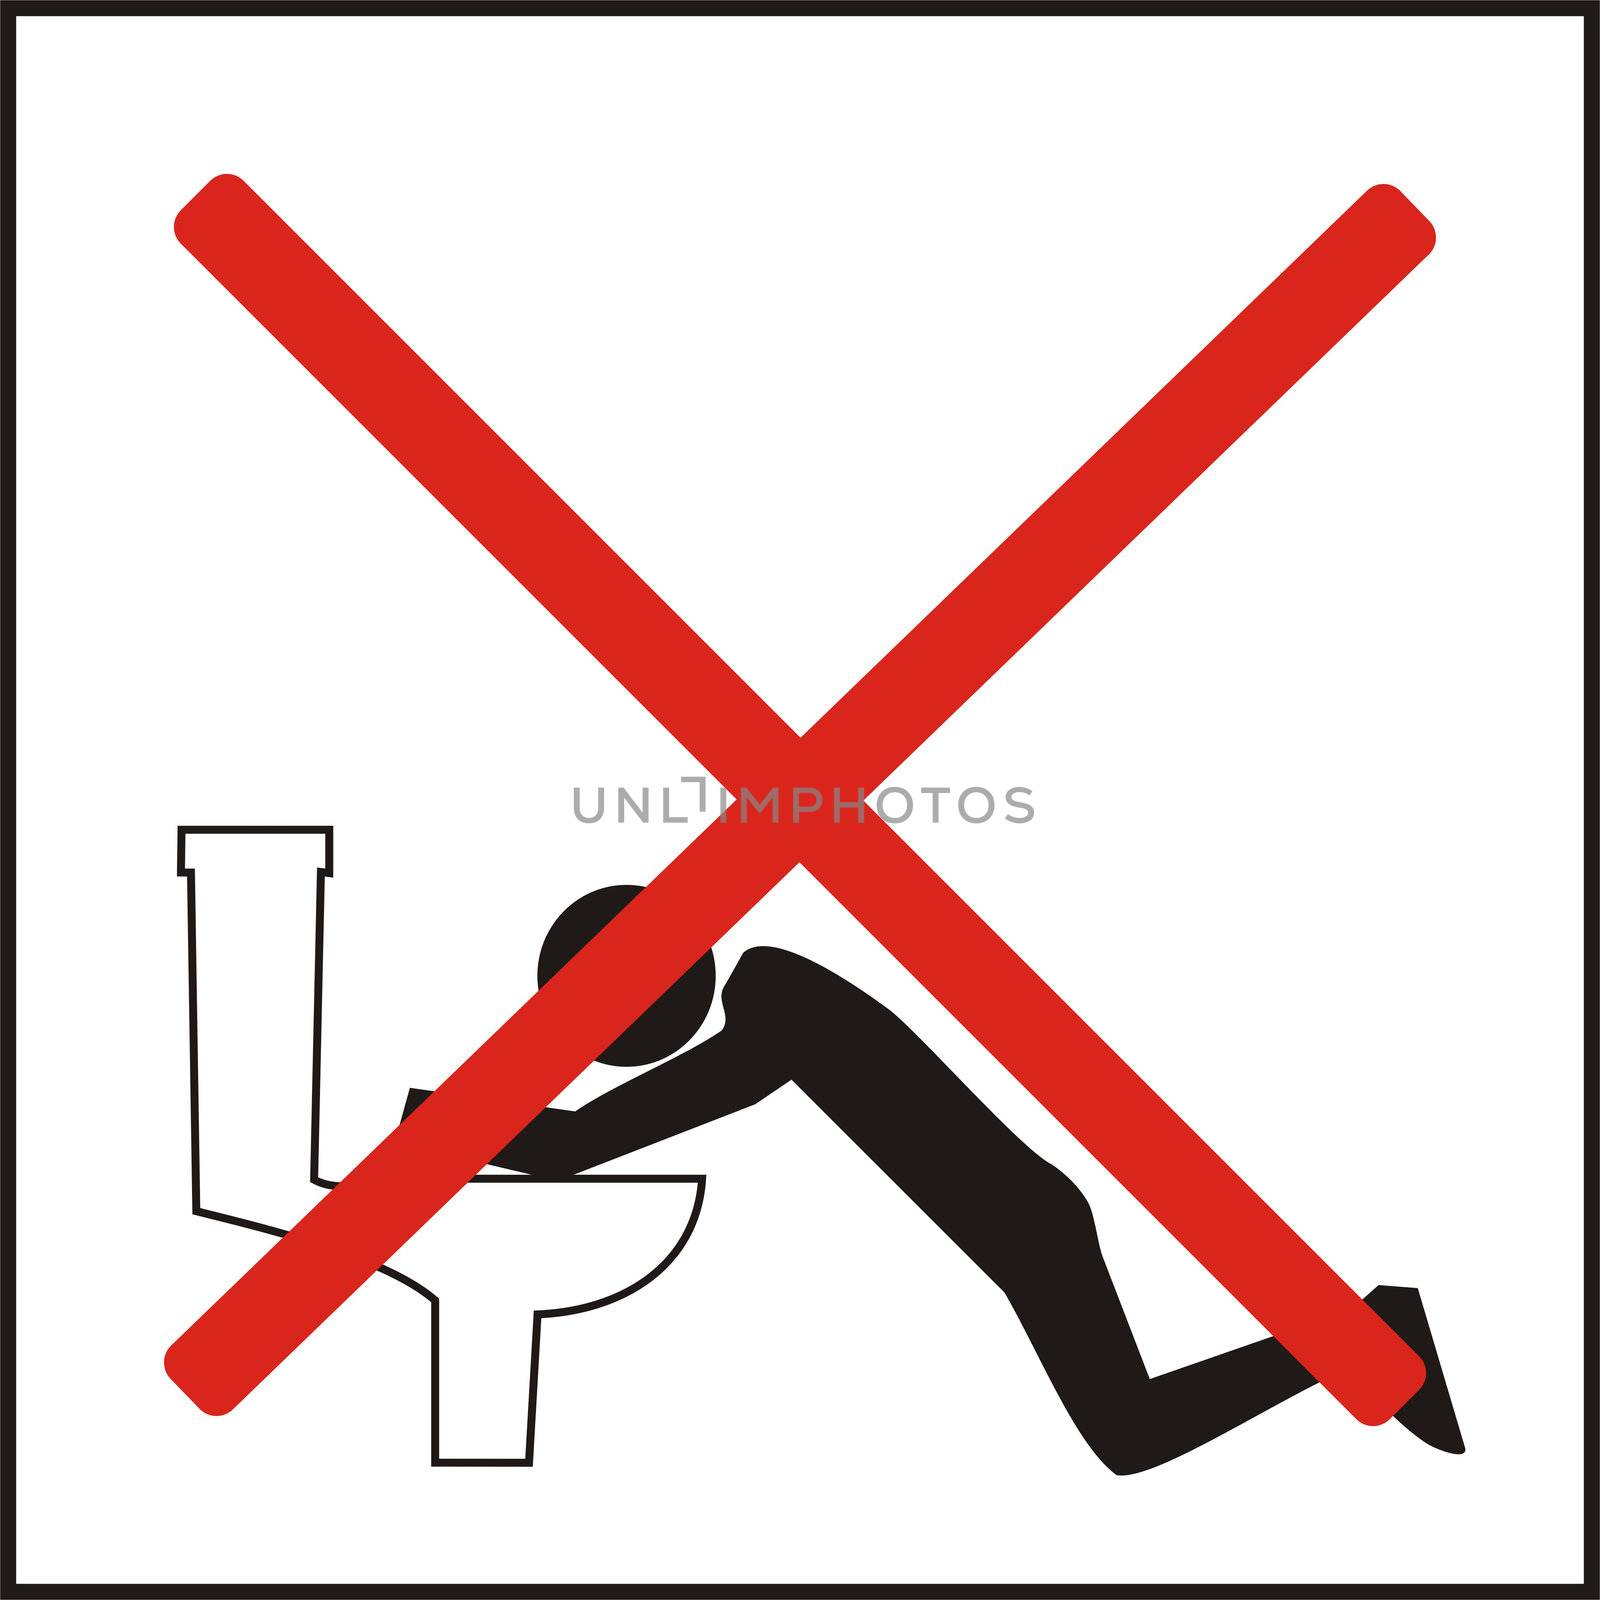 Incorrect ways of using the public toilets by dacasdo